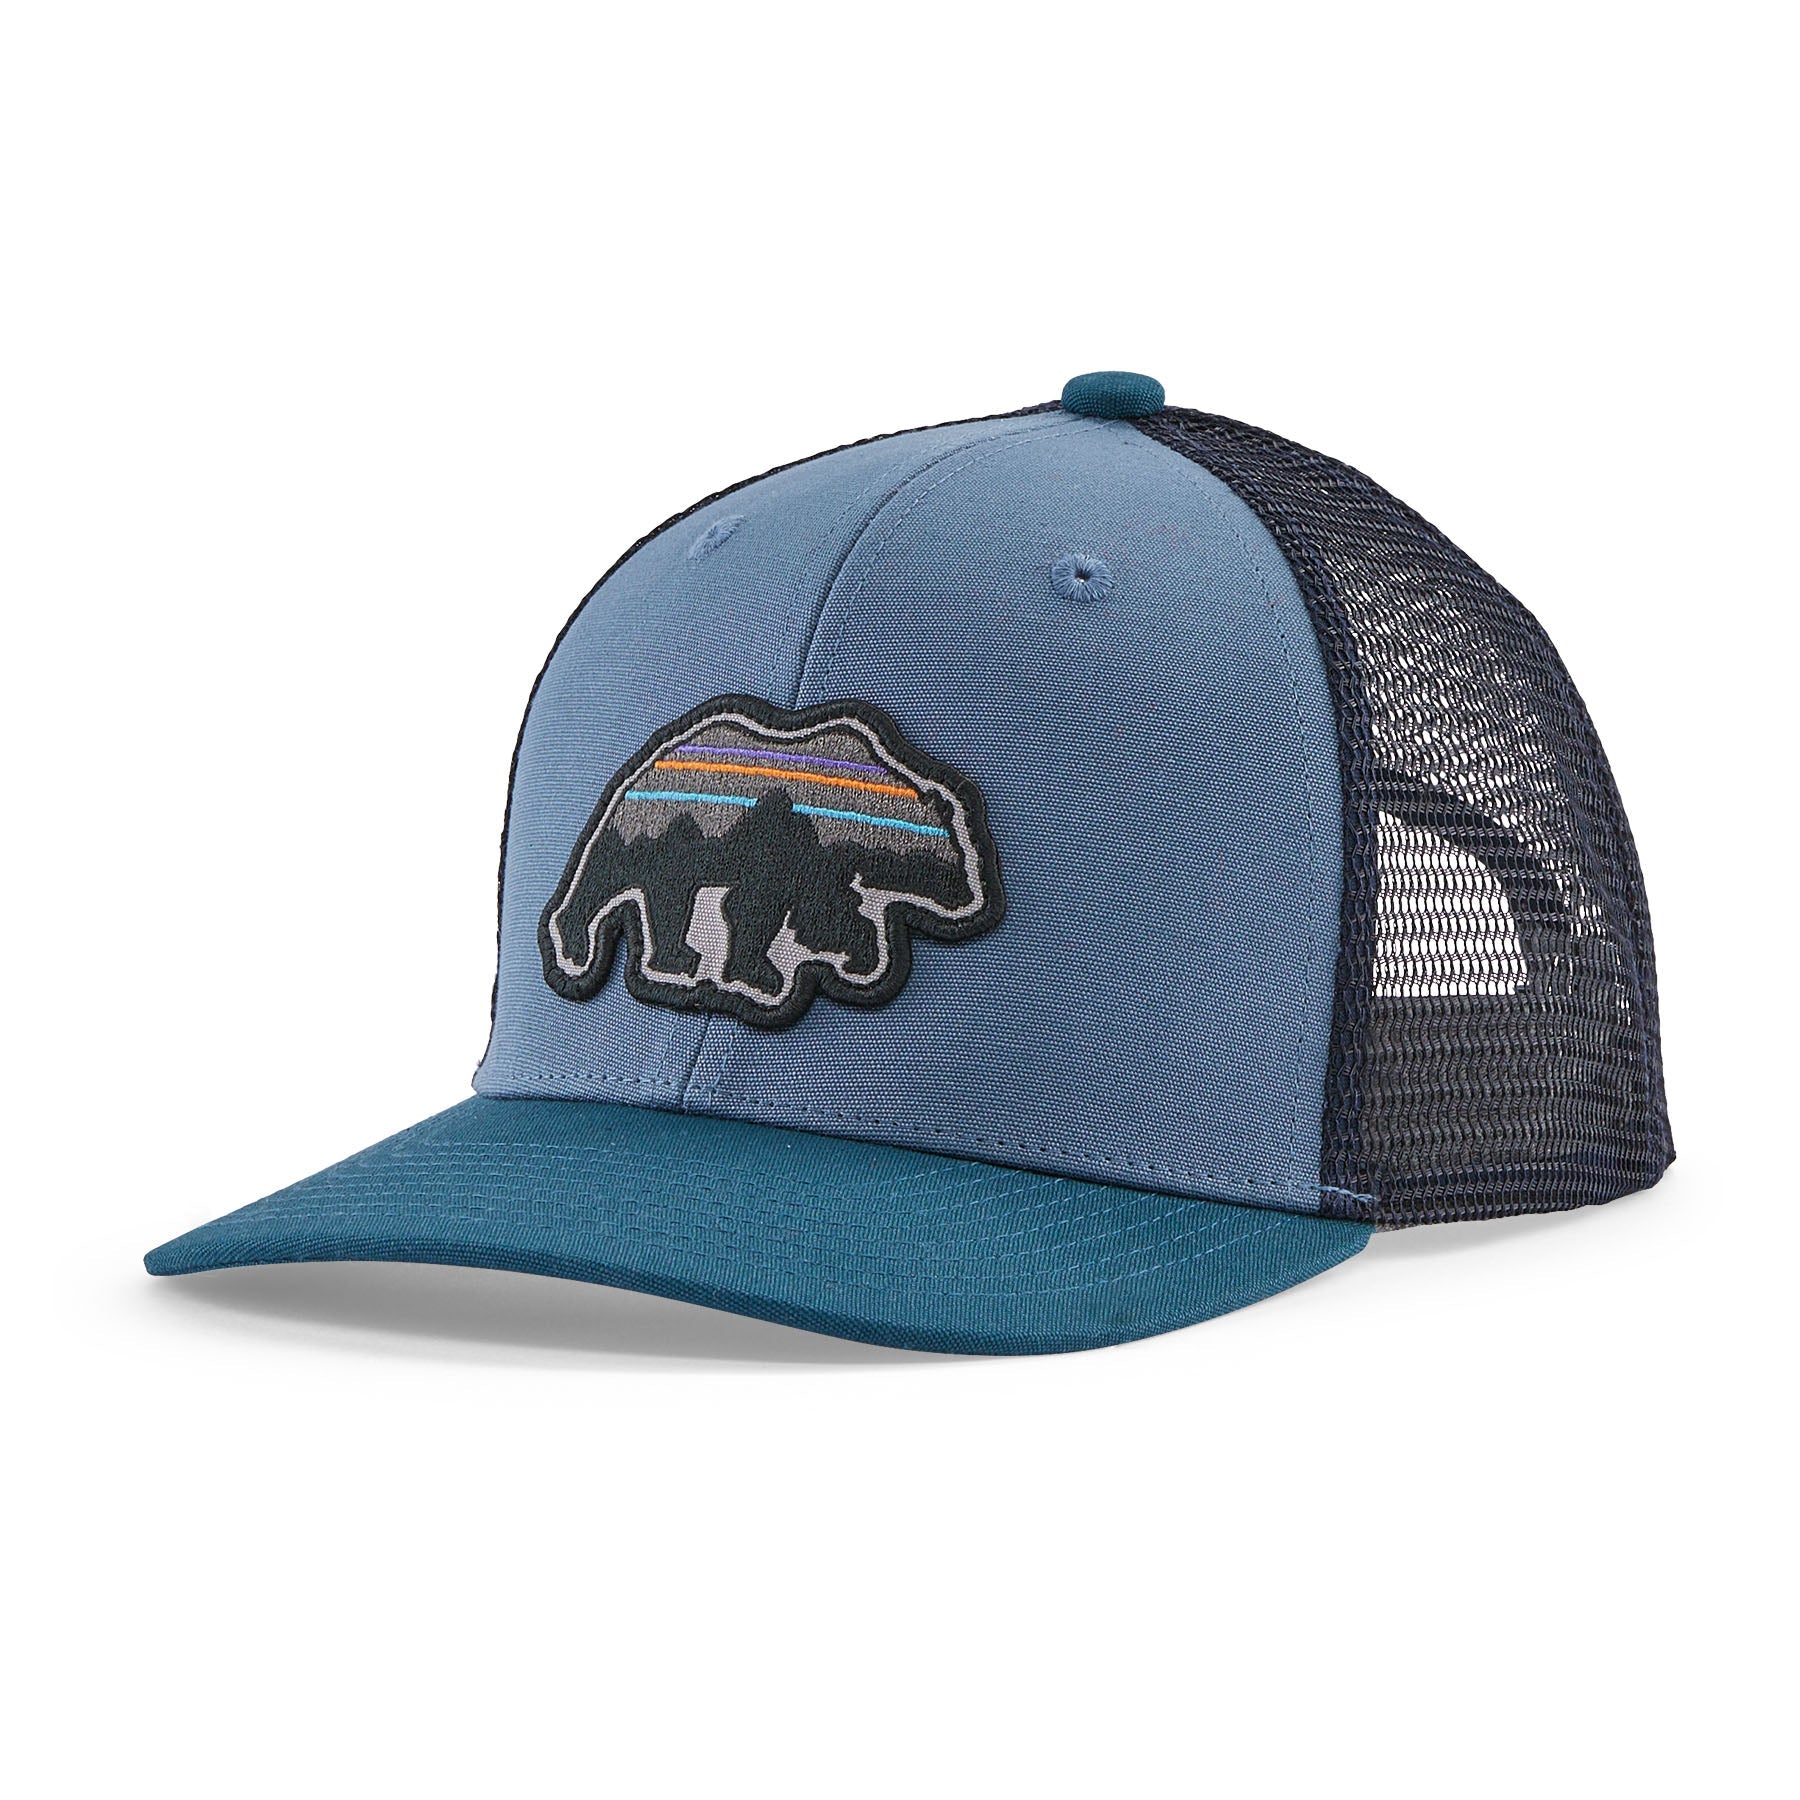 Patagonia Kids Trucker Hat - Mountain Kids Outfitters